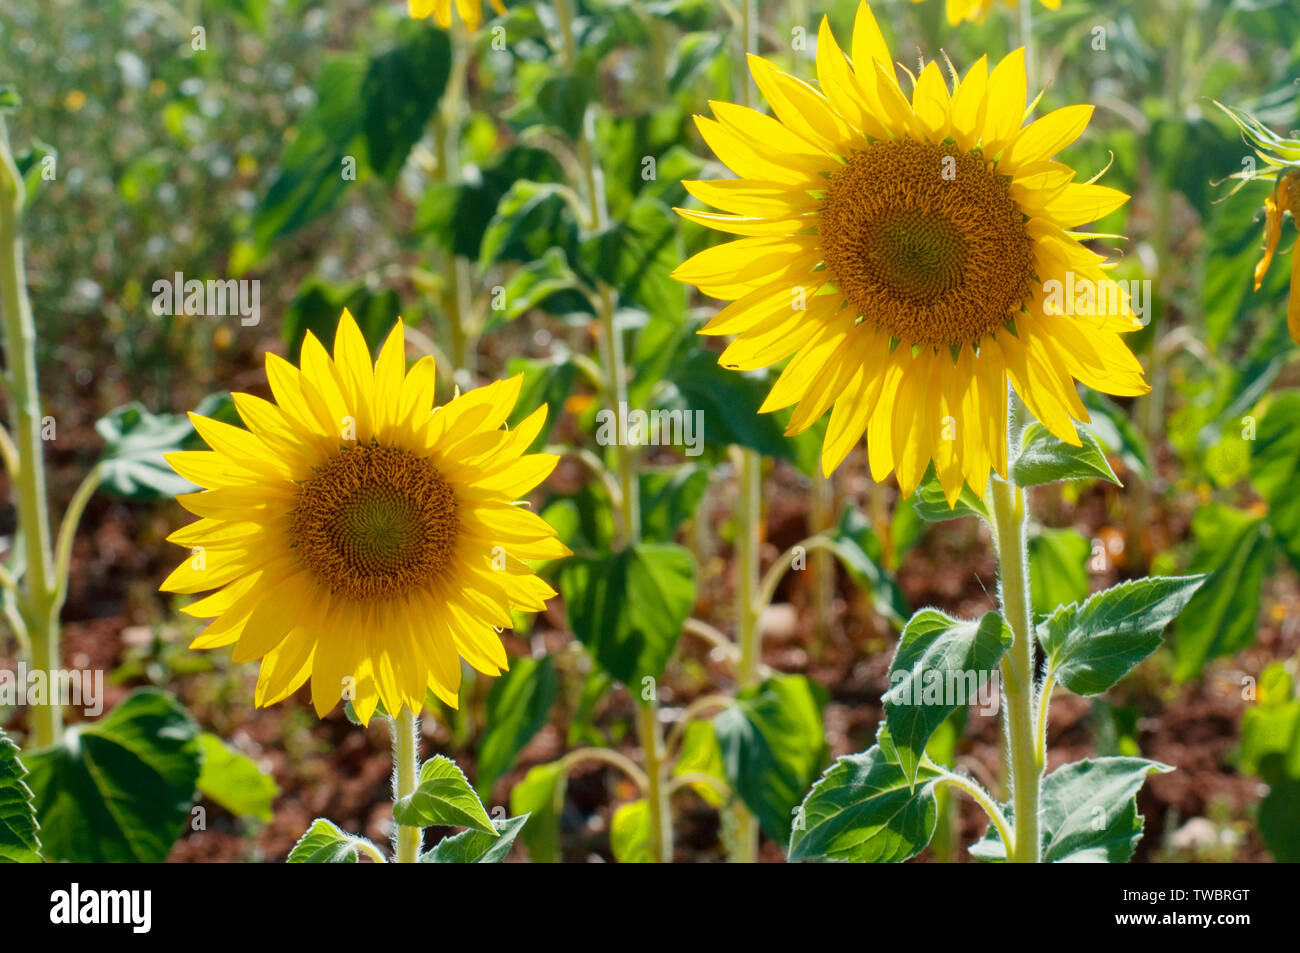 Two sunflowers. Stock Photo